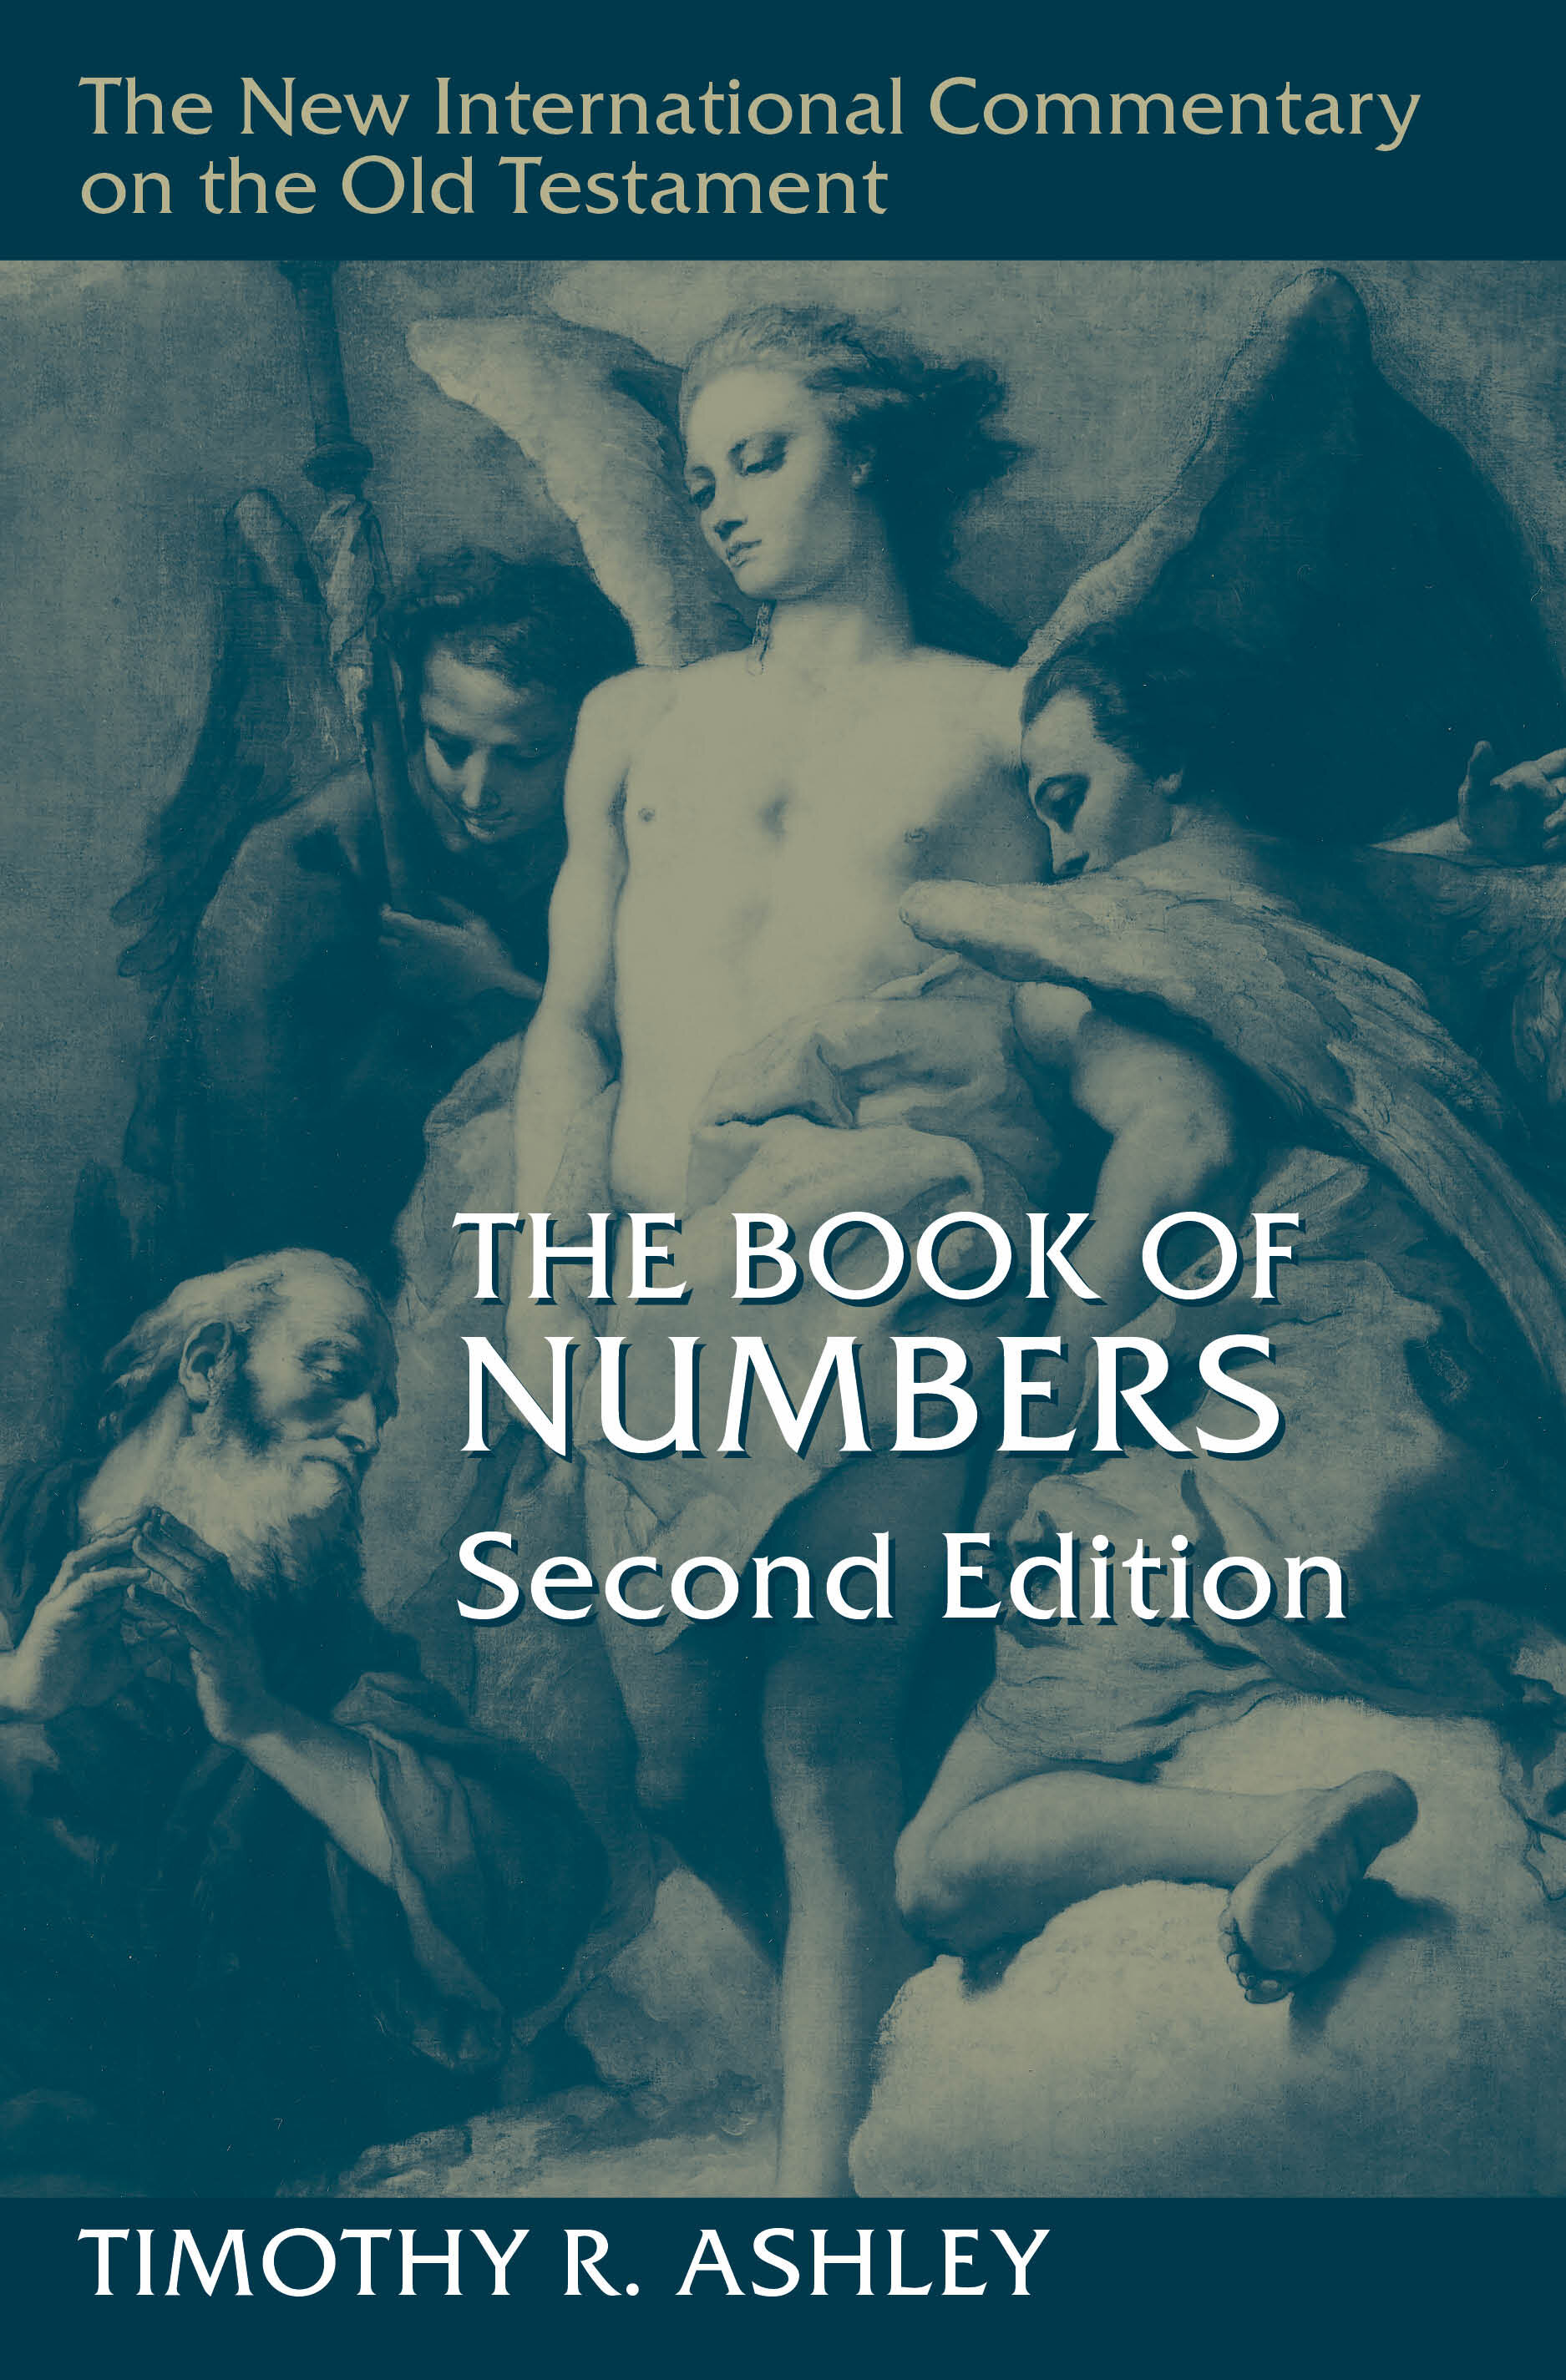 The Book of Numbers, 2nd ed. (The New International Commentary on the Old Testament | NICOT)